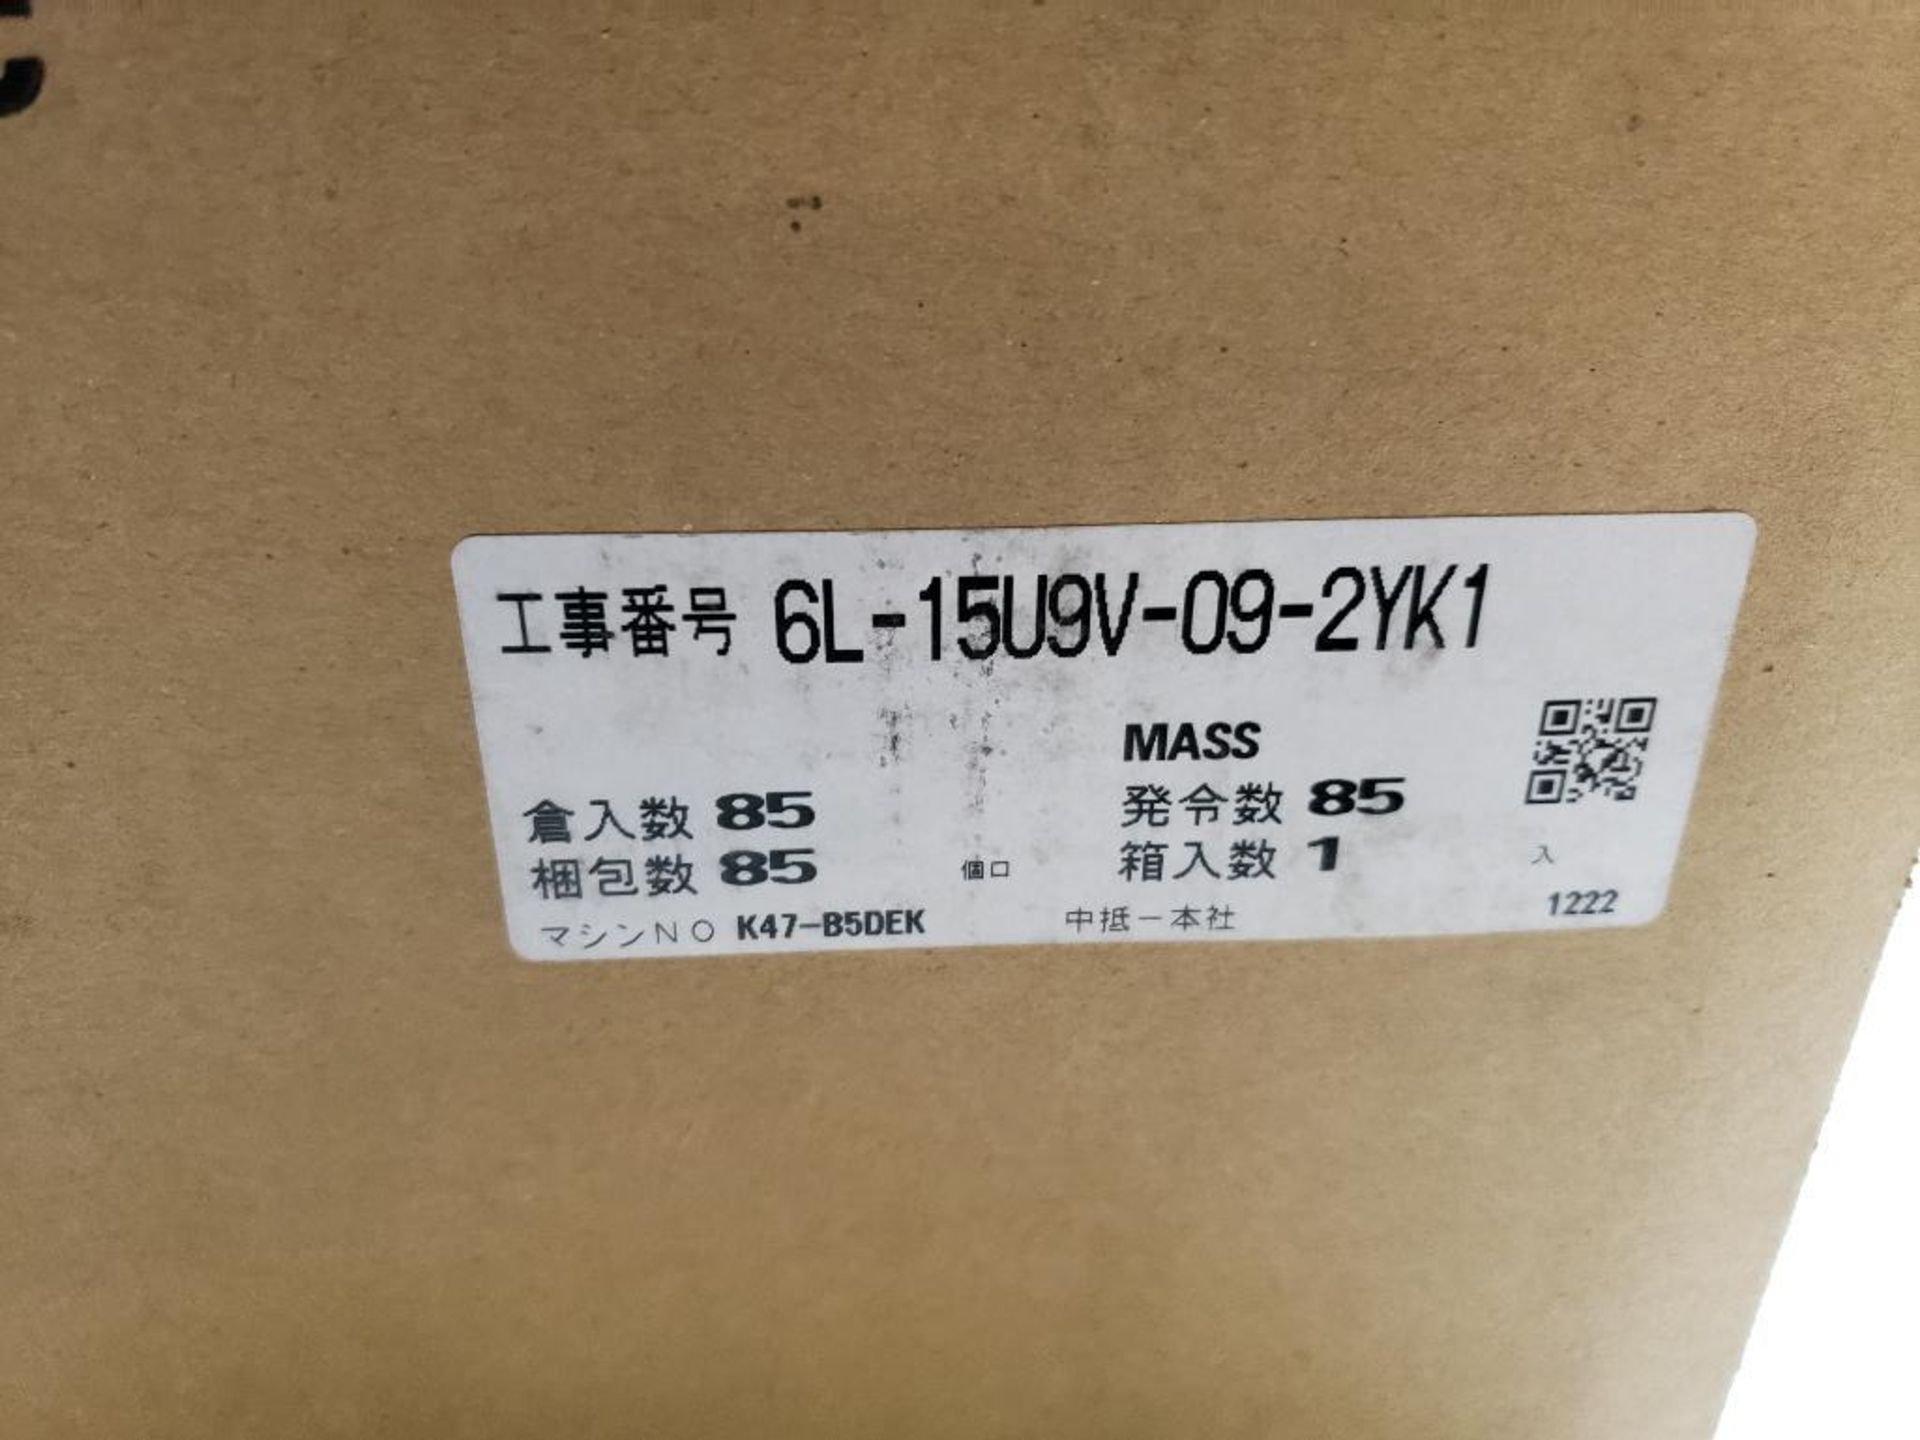 Mitsubishi inverter drive. Part number FR-D740-080-N7. New in box. - Image 5 of 6